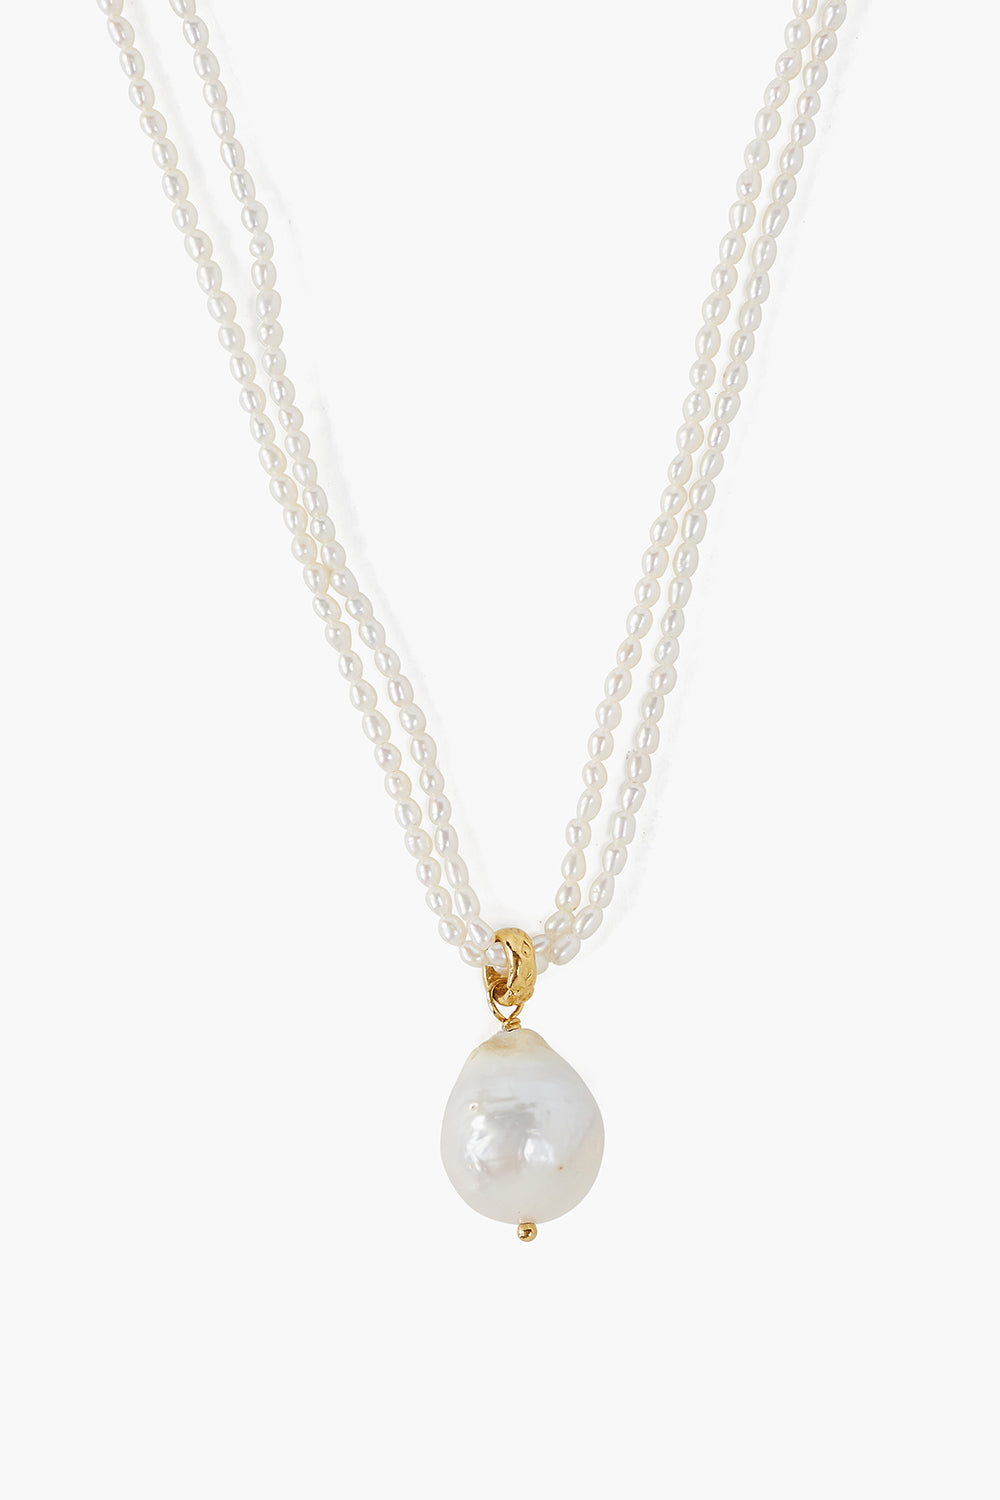 WHITE FRESHWATER PEARL ADJUSTABLE NECKLACE